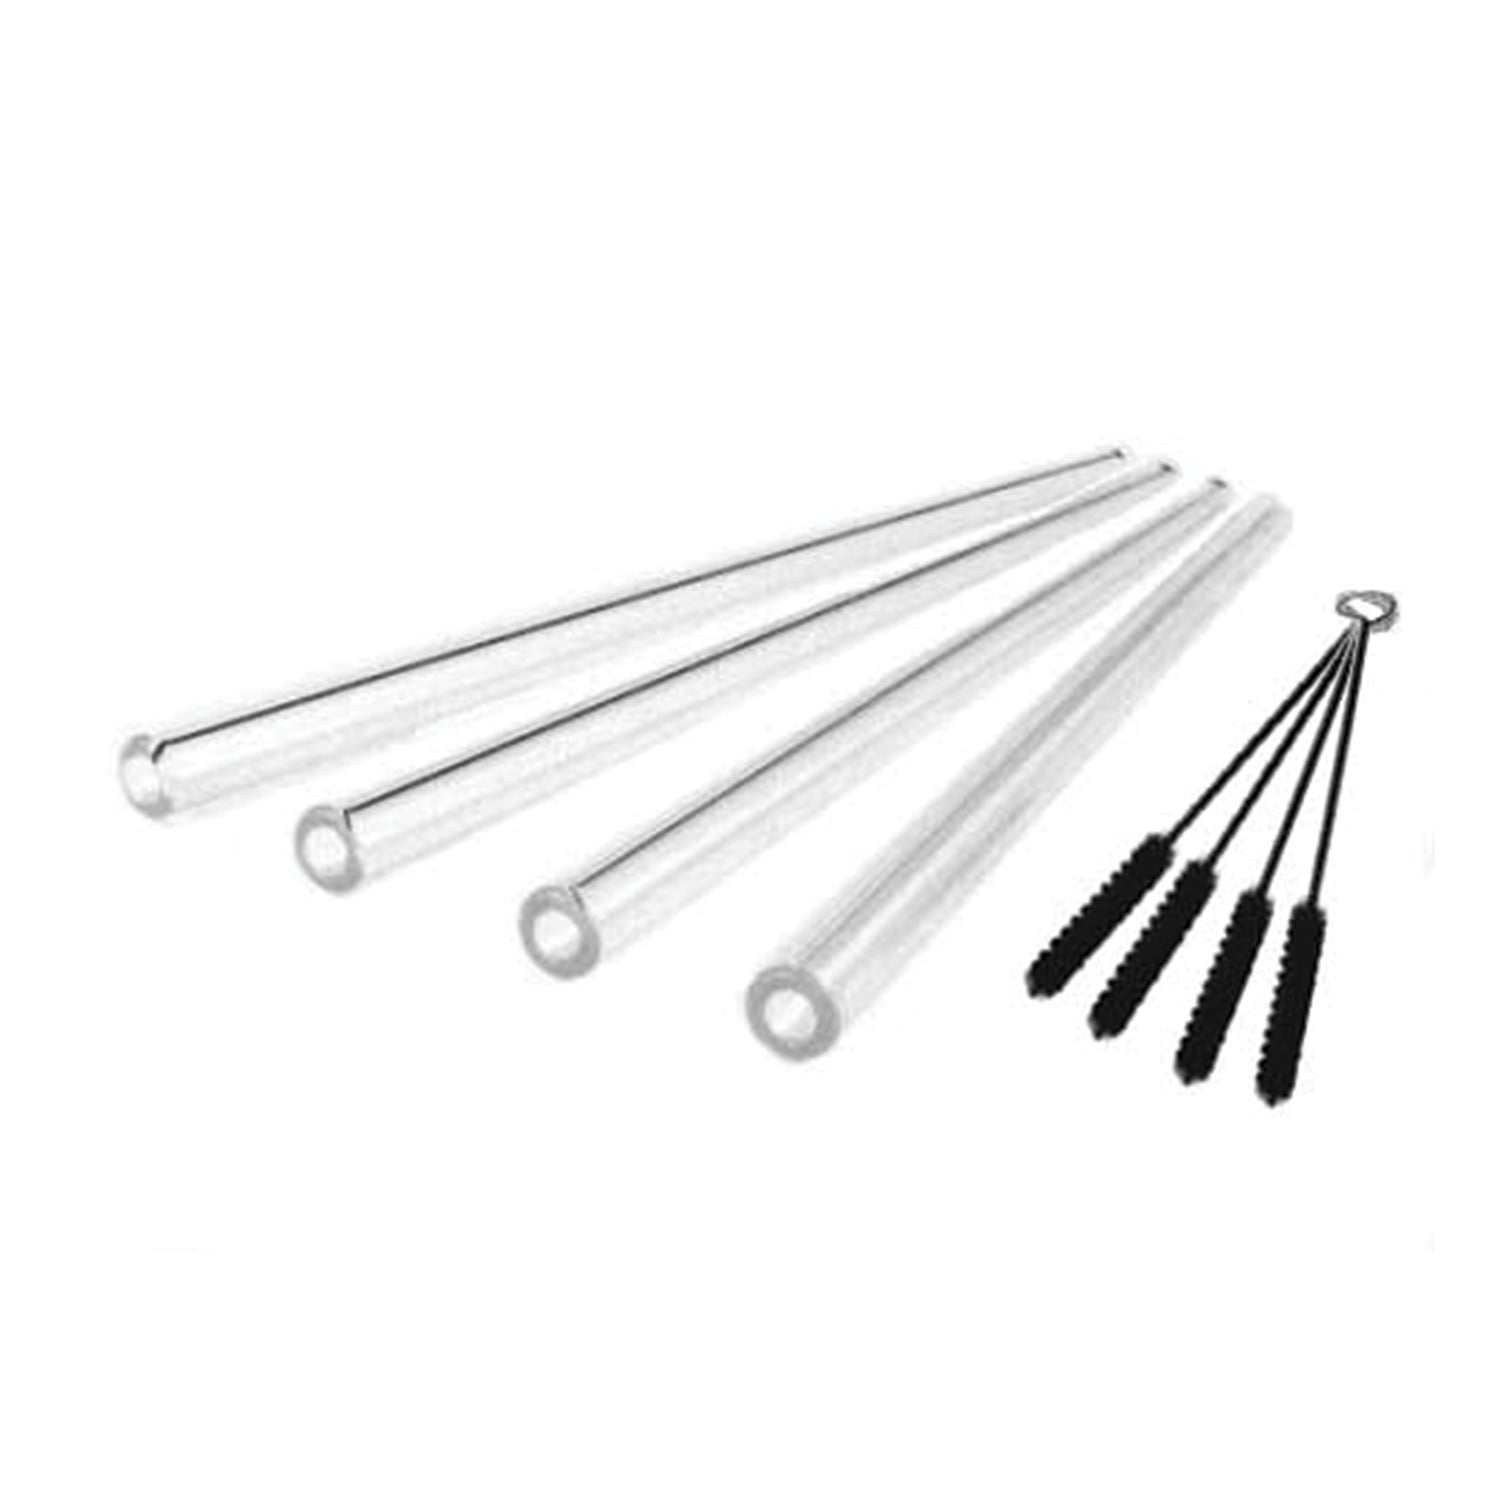 Stainless Steel Straw - Single - Package-Free - Eco Girl Shop